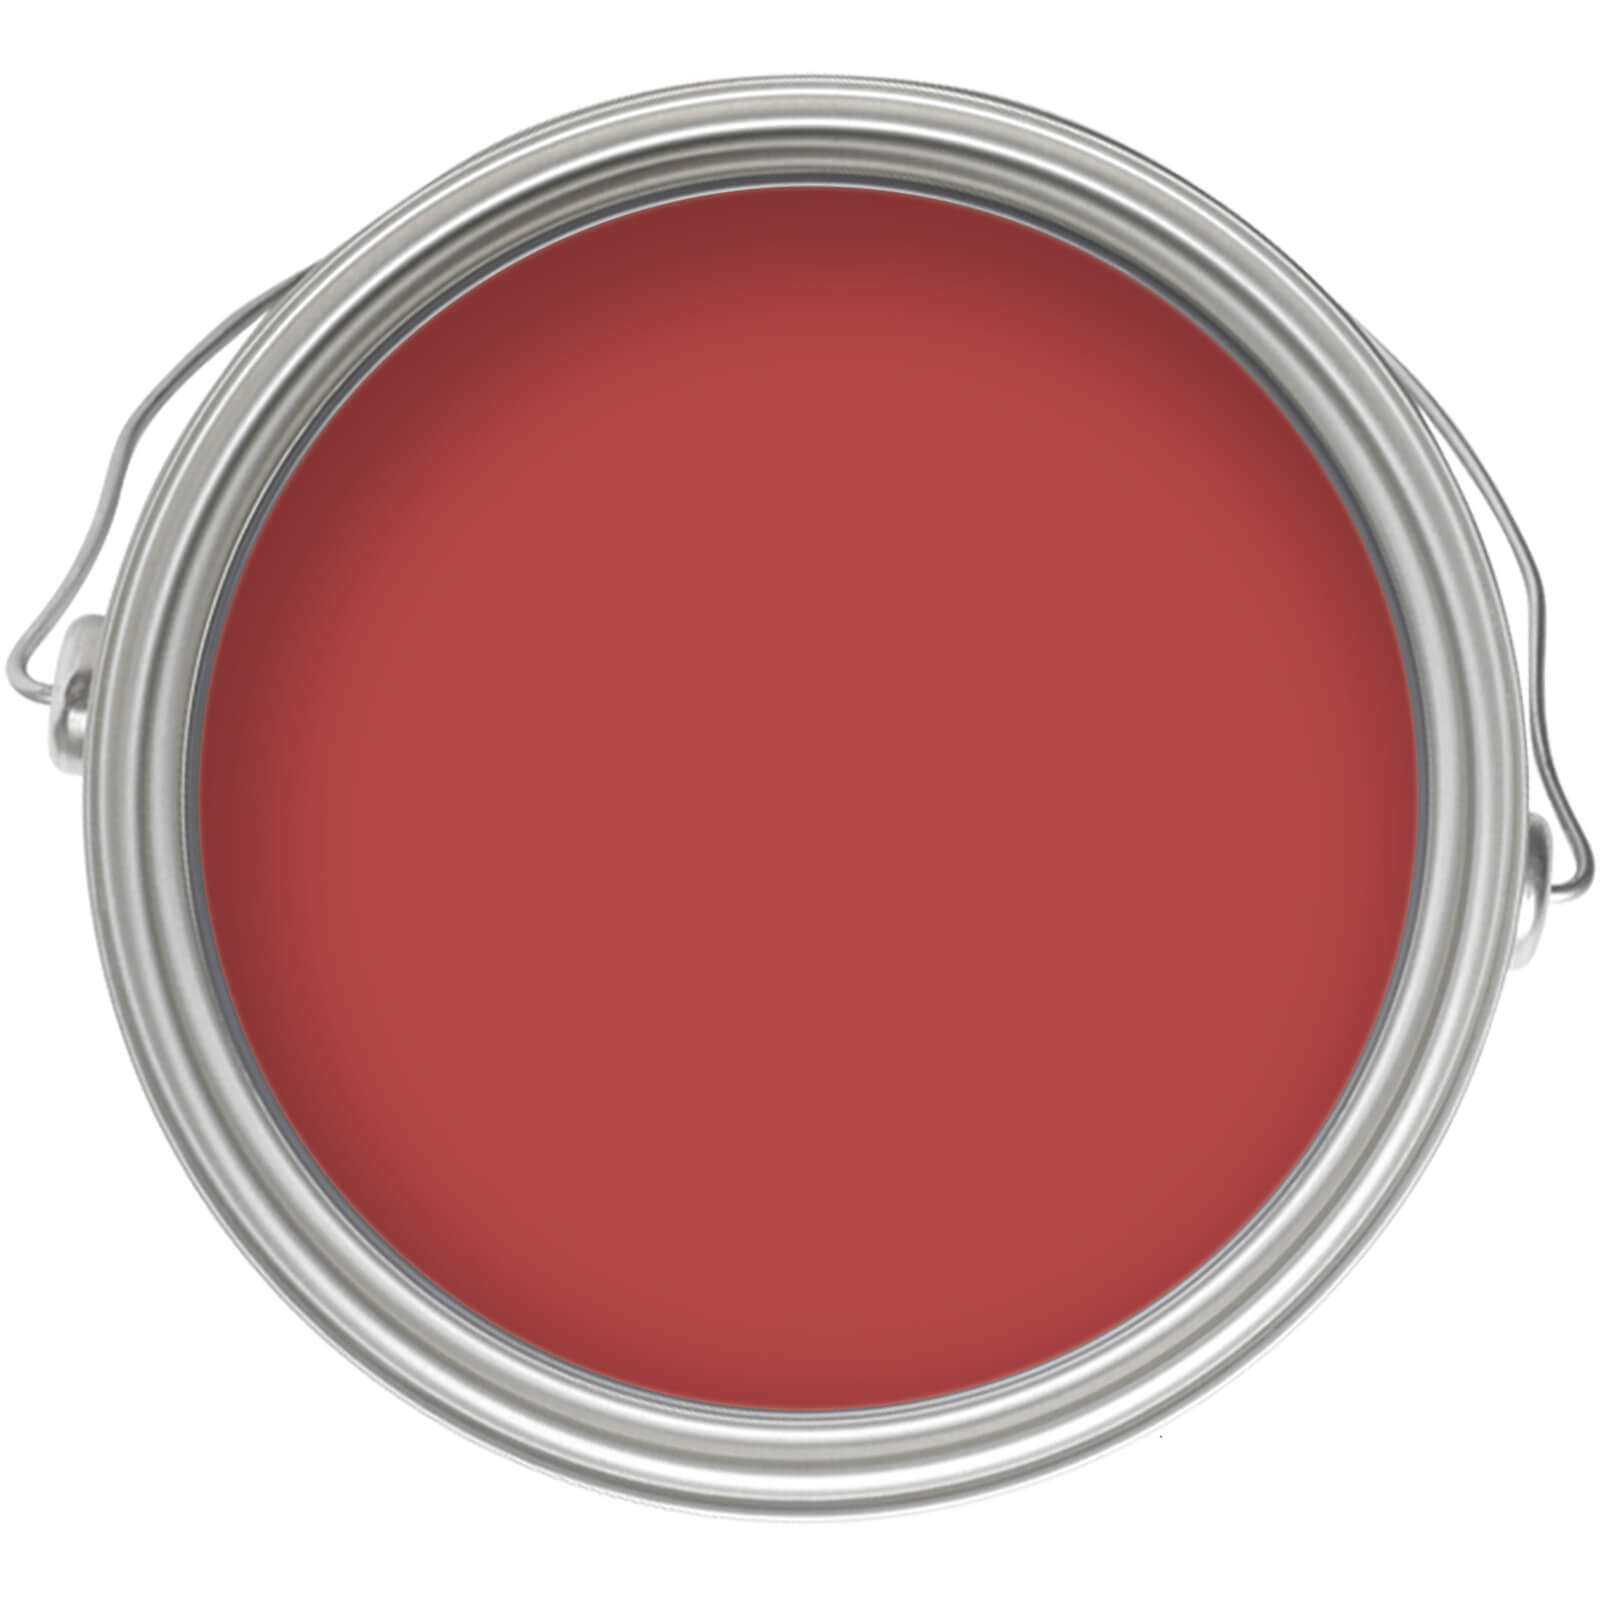 Dulux Easycare Kitchen Pepper Red Tester Paint - 30ml